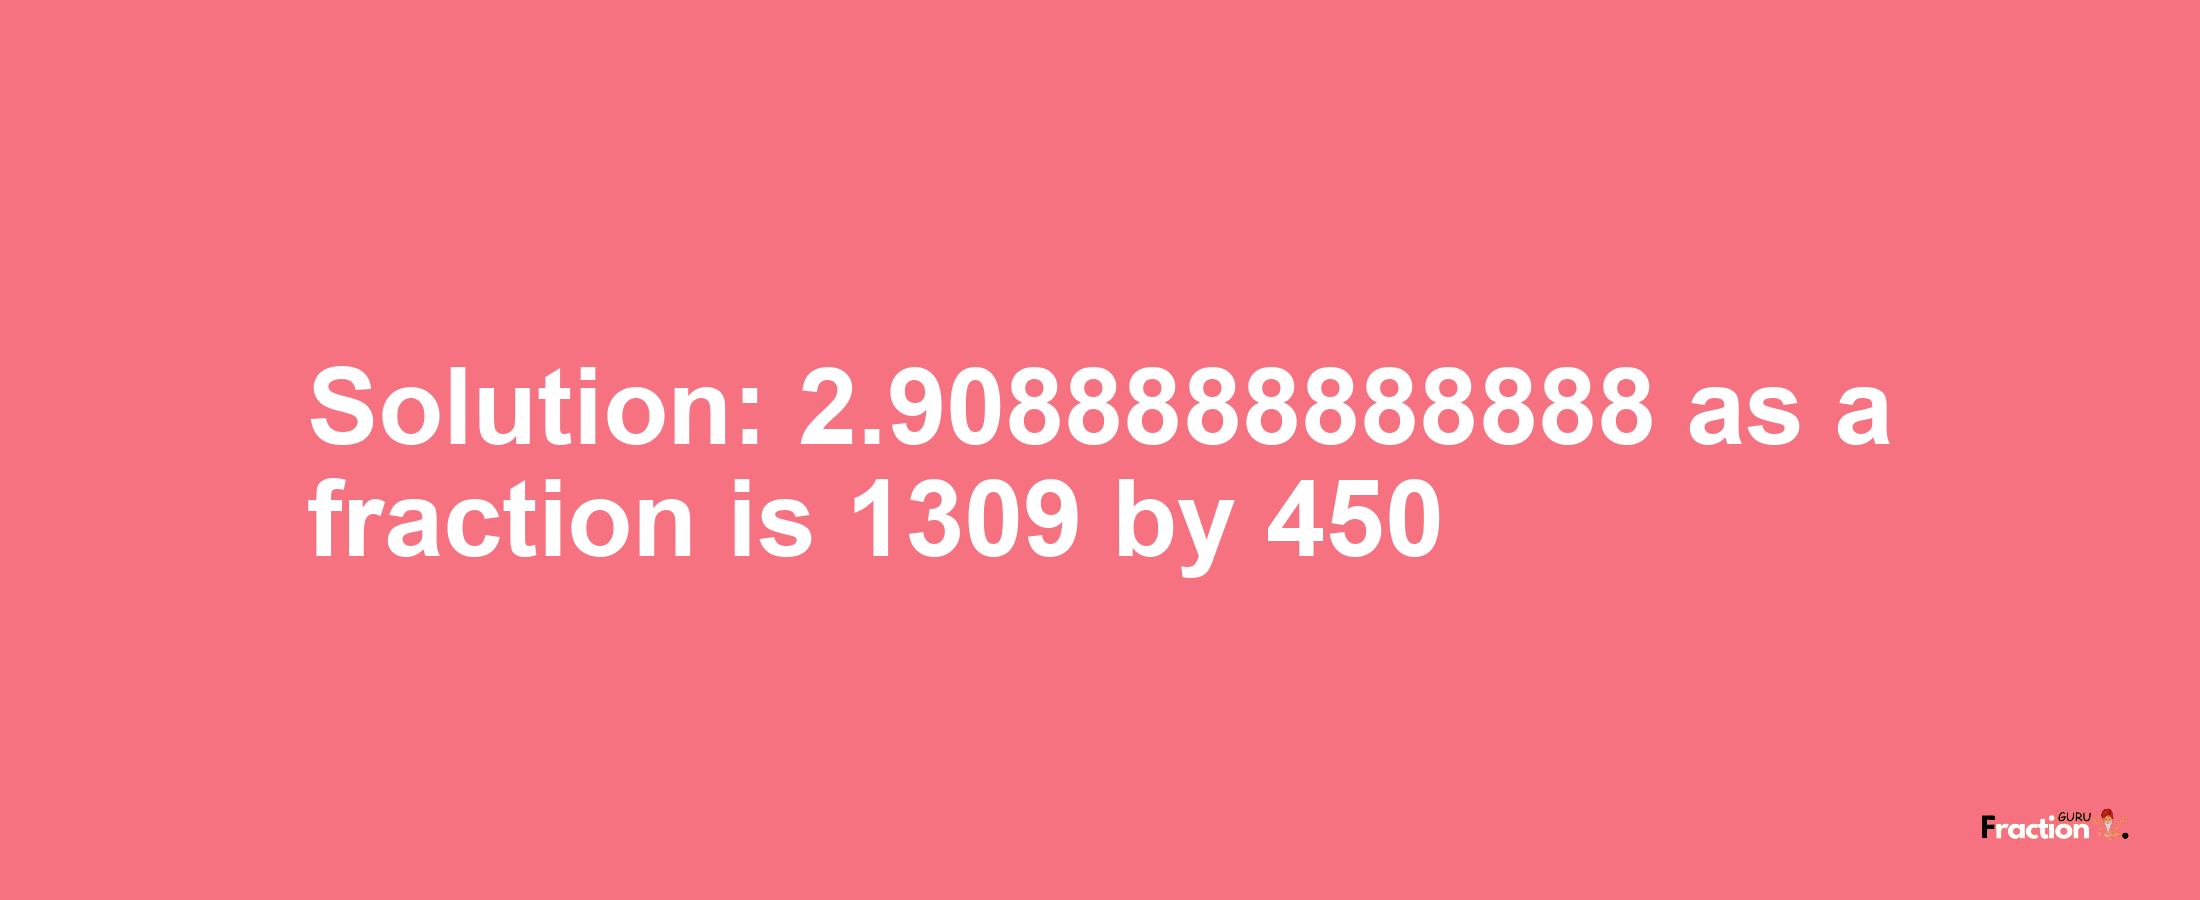 Solution:2.9088888888888 as a fraction is 1309/450